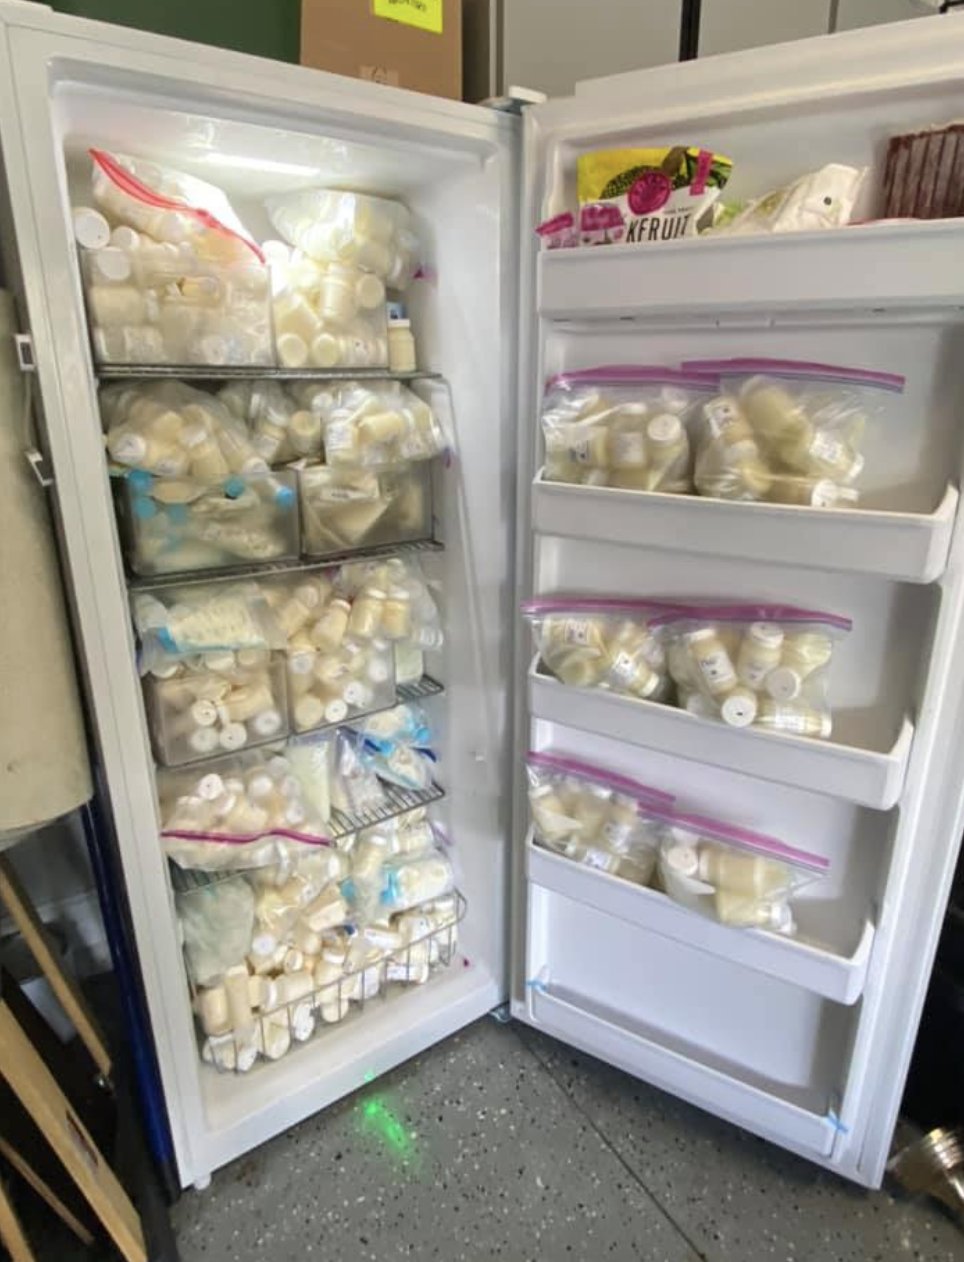 Some of the 2,500 ounces of breastmilk donated to the Diaz family.